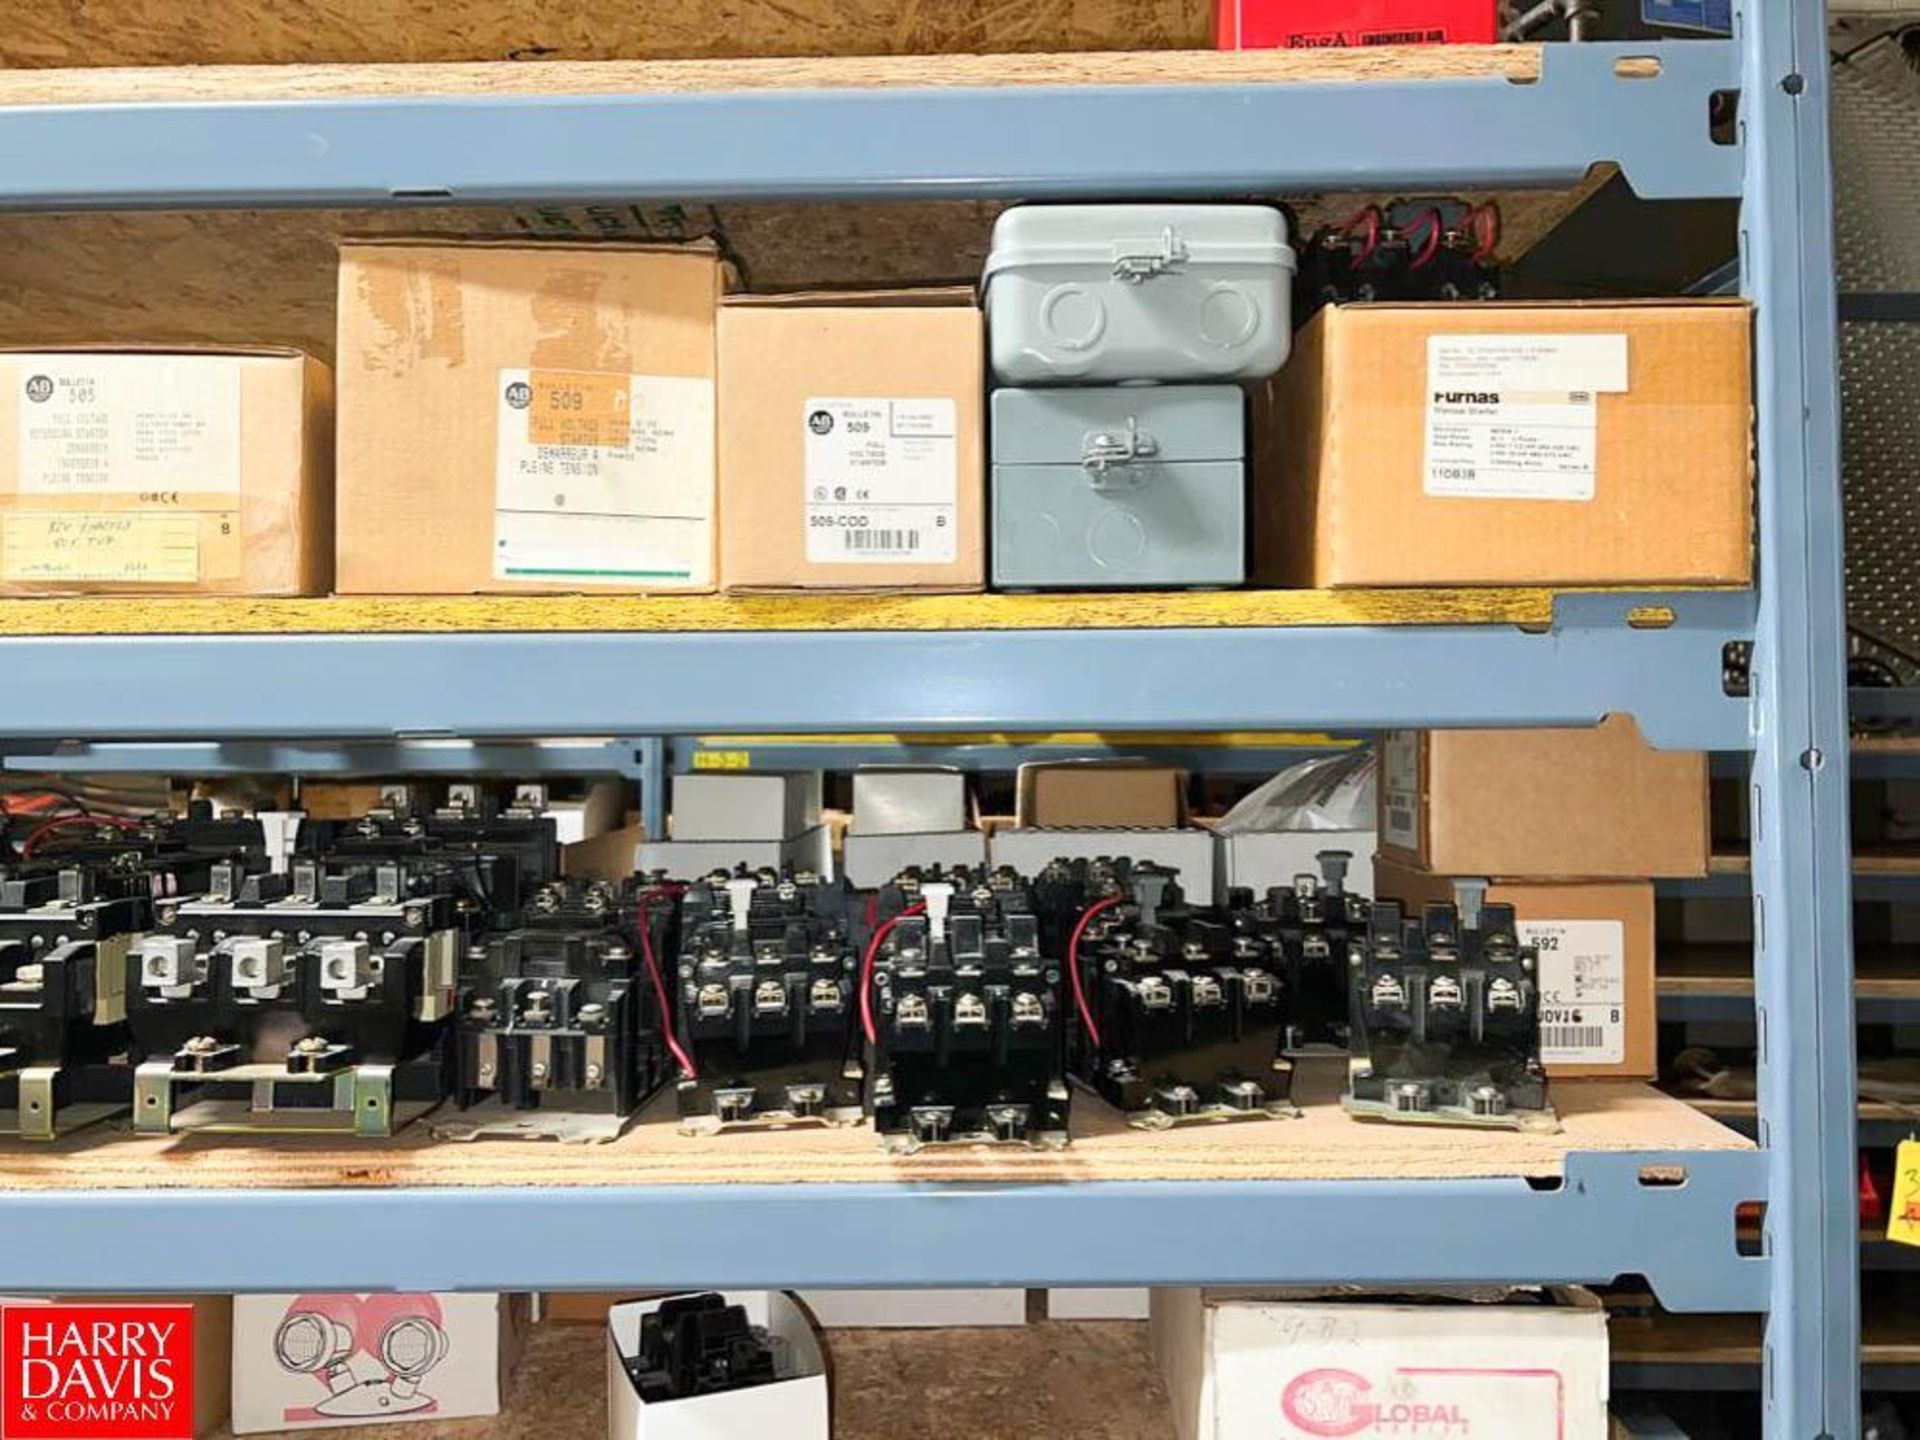 Assorted Electrical Equipment, Including: Circuit Breakers, Conduit, Conduit Adapters and Enclosures